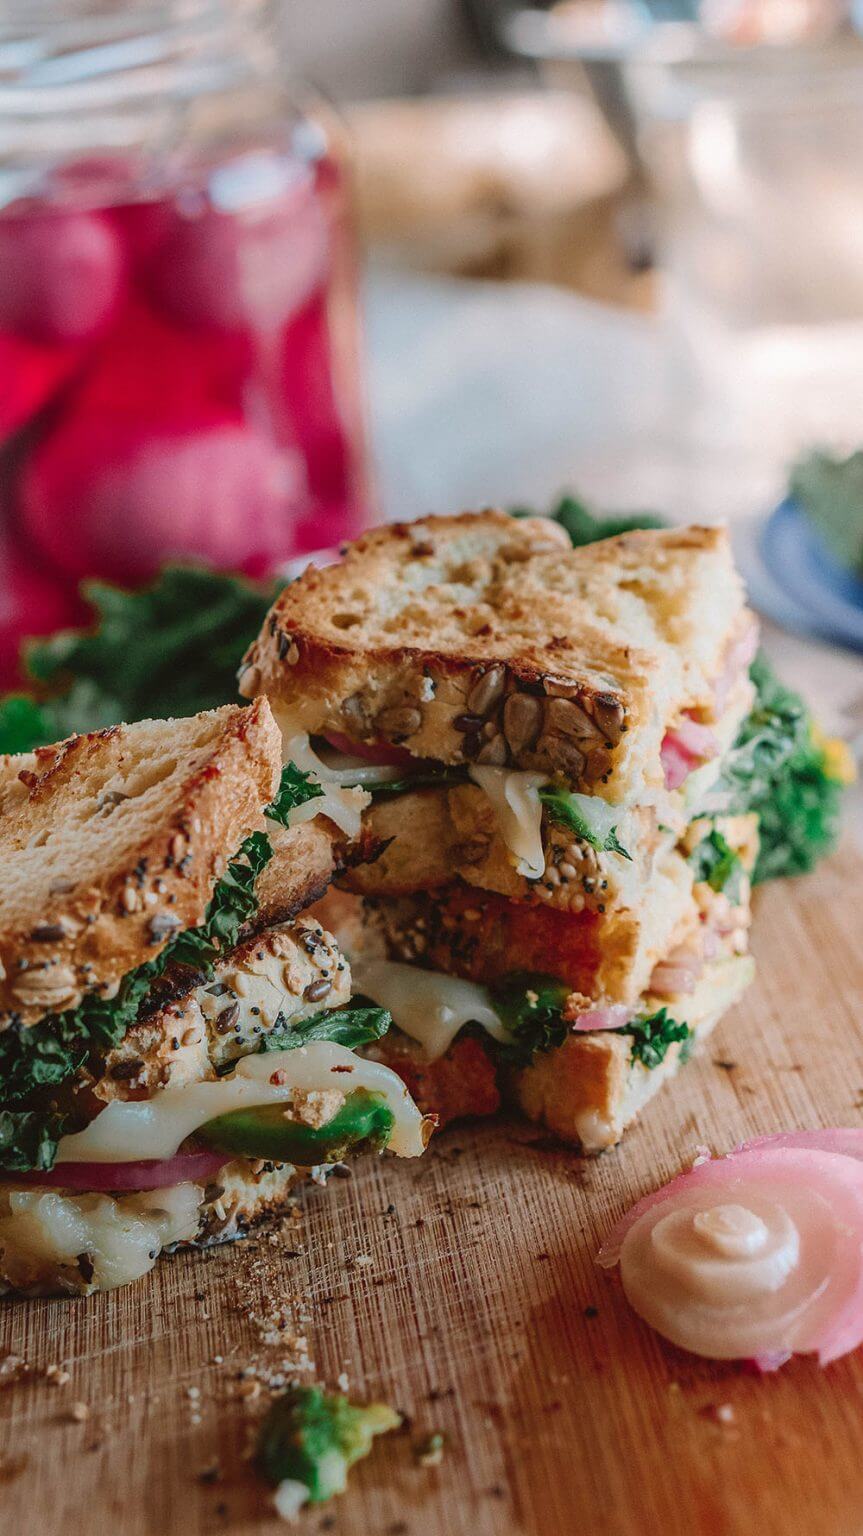 VegNews.KaleAvocadoGrilled Cheese